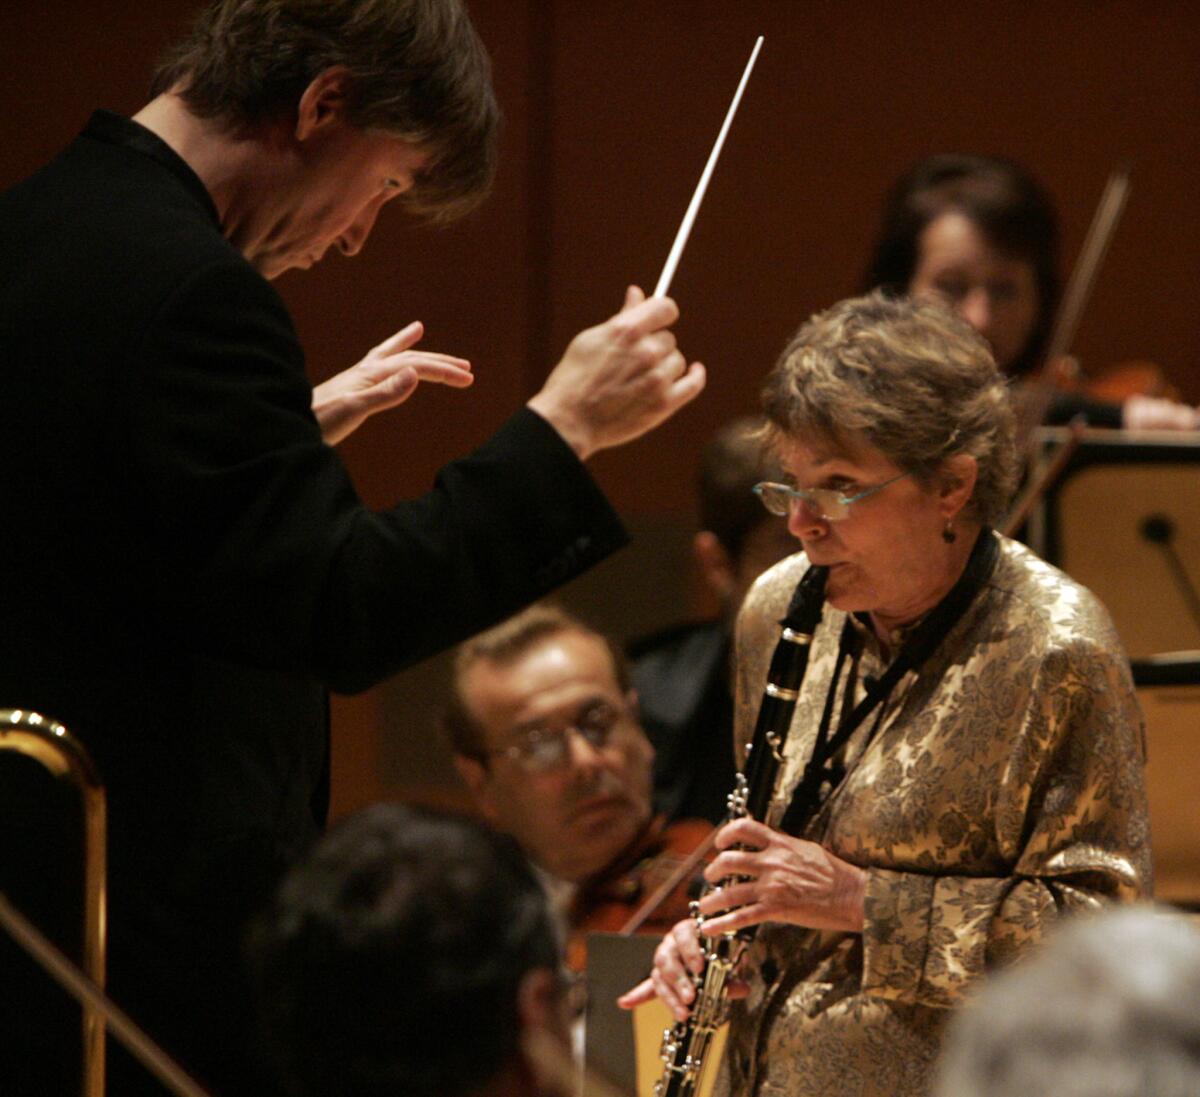 Los Angeles Philharmonic Conductor Esa–Pekka Salonen, left, directs clarinetist Michele Zukovsky during a performance of Mozart's Clarinet Concerto in A major at the Walt Disney Concert Hall on April 24, 2008. Zukovsky will retire at the end of the year.